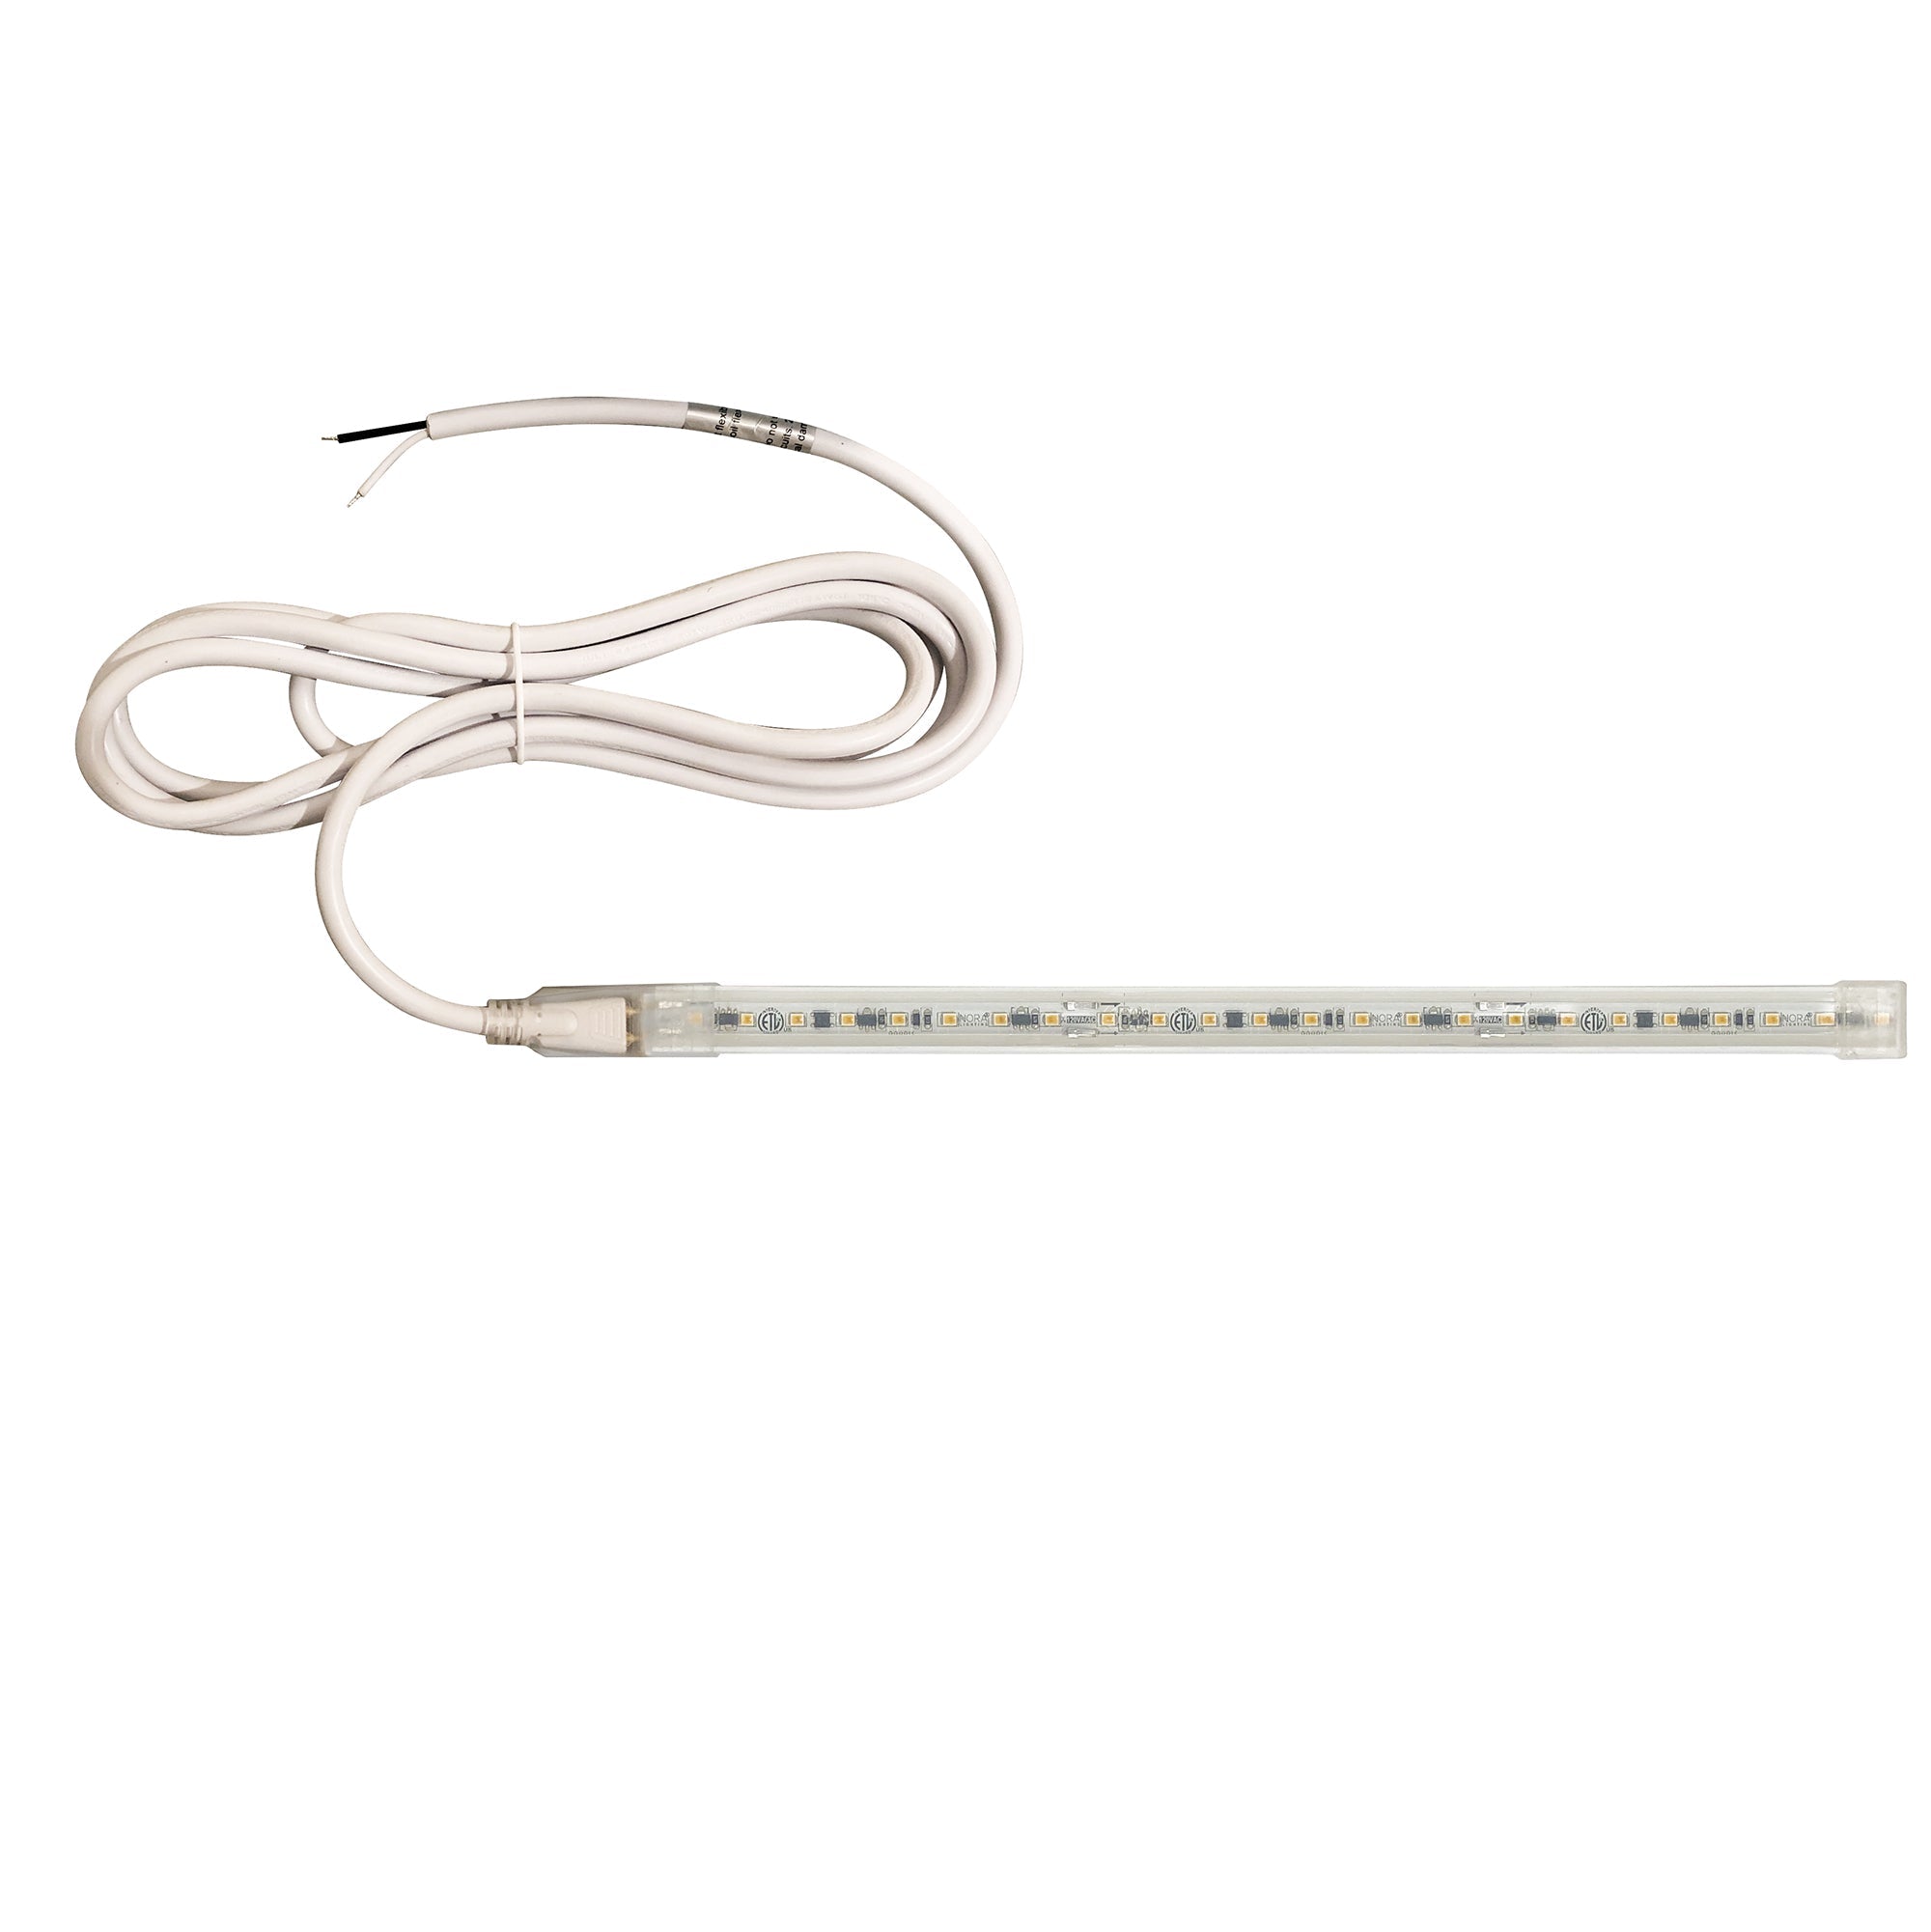 Nora Lighting NUTP13-W104-12-930/HW - Accent / Undercabinet - Custom Cut 104-ft 120V Continuous LED Tape Light, 330lm / 3.6W per foot, 3000K, w/ Mounting Clips and 8' Hardwired Power Cord